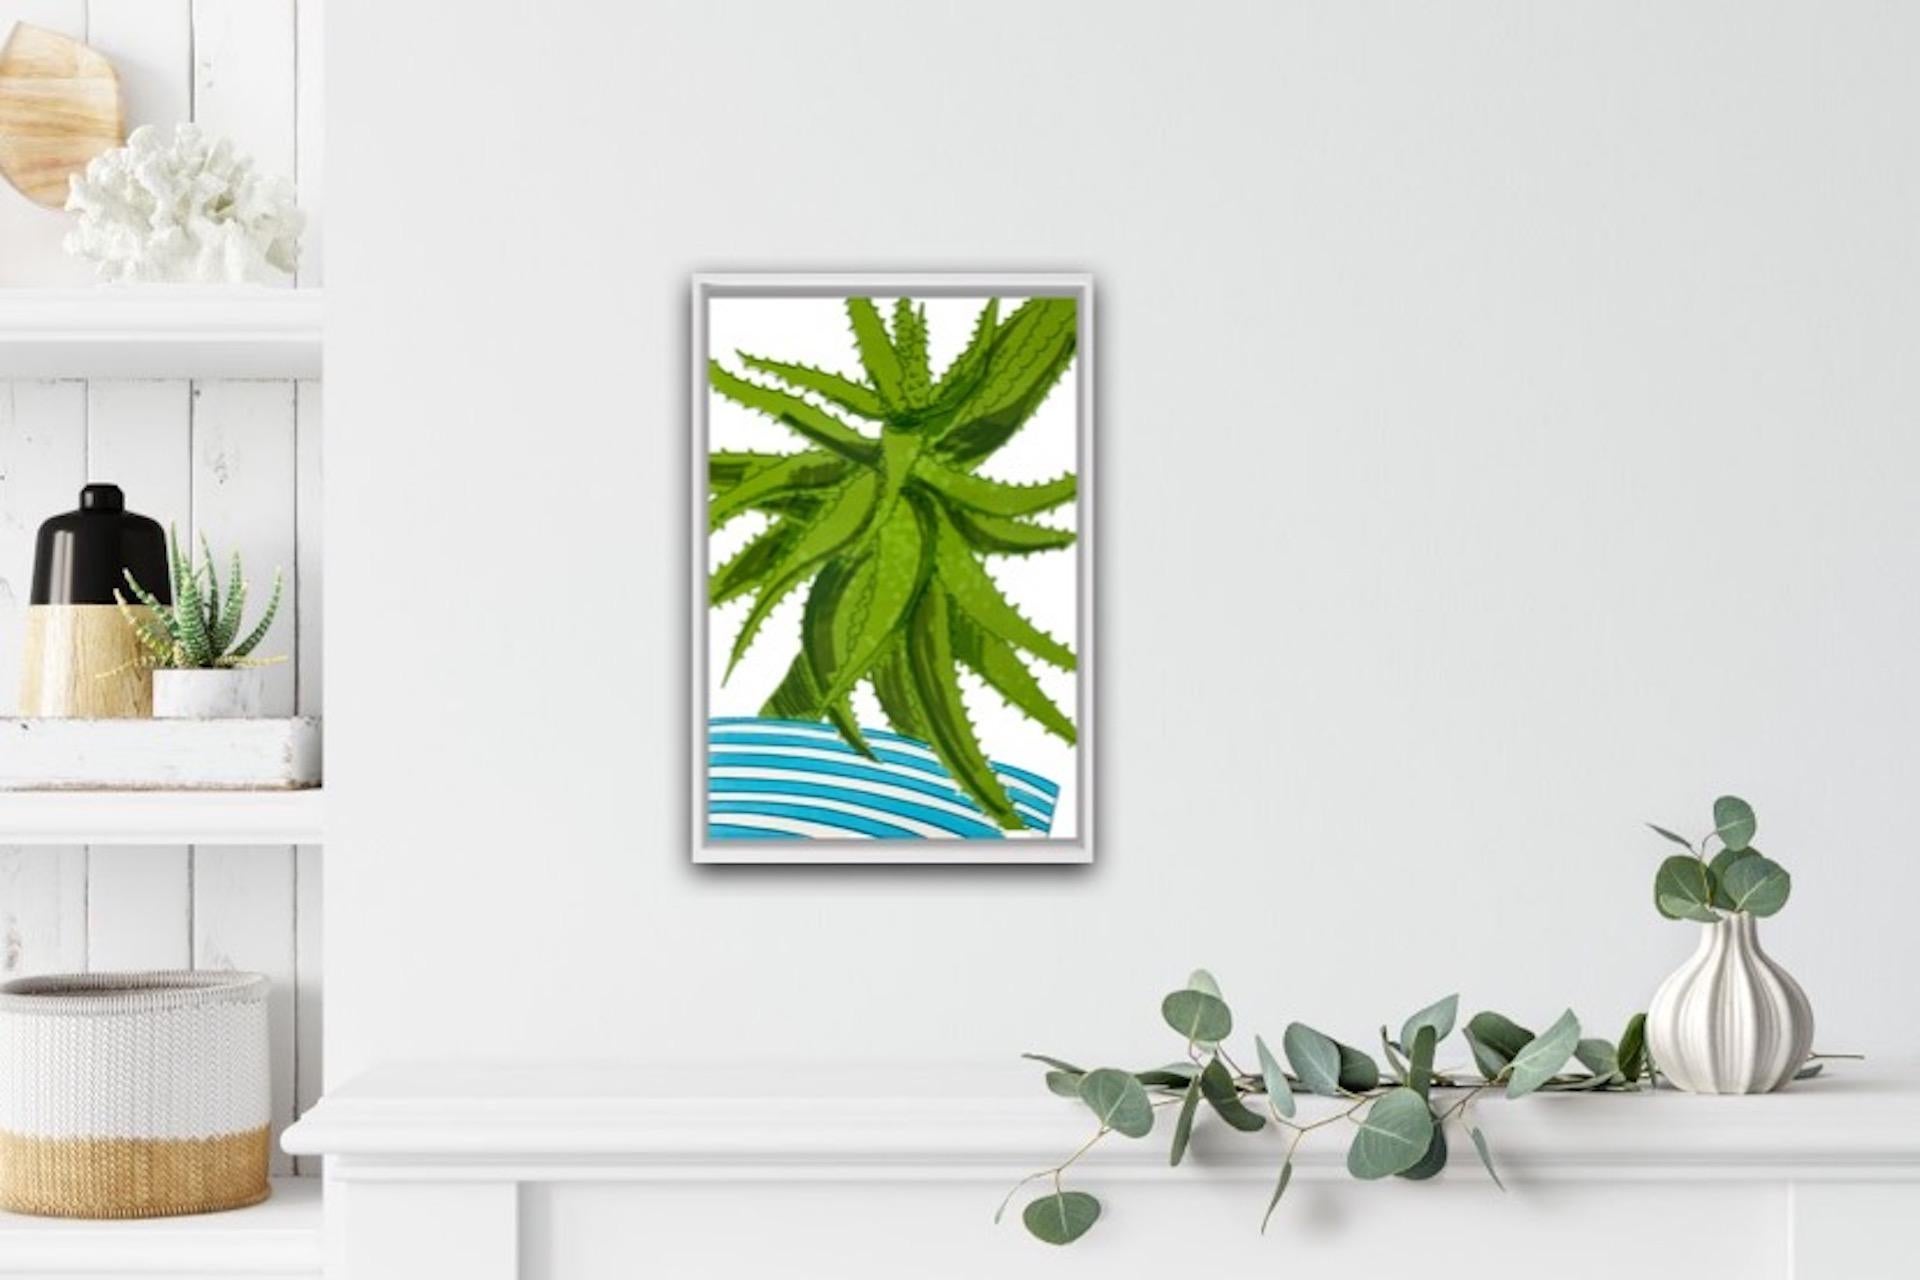 Kerry Day
Aloe Vera
Limited Edition Screen Print
Edition of 20
Still Life Art
Sheet Size: H 42cm x W 29cm x D 0.1cm
Sold Unframed
Please note that insitu images are purely an indication of how a piece may look.

A lovely spiky Still life of an Aloe